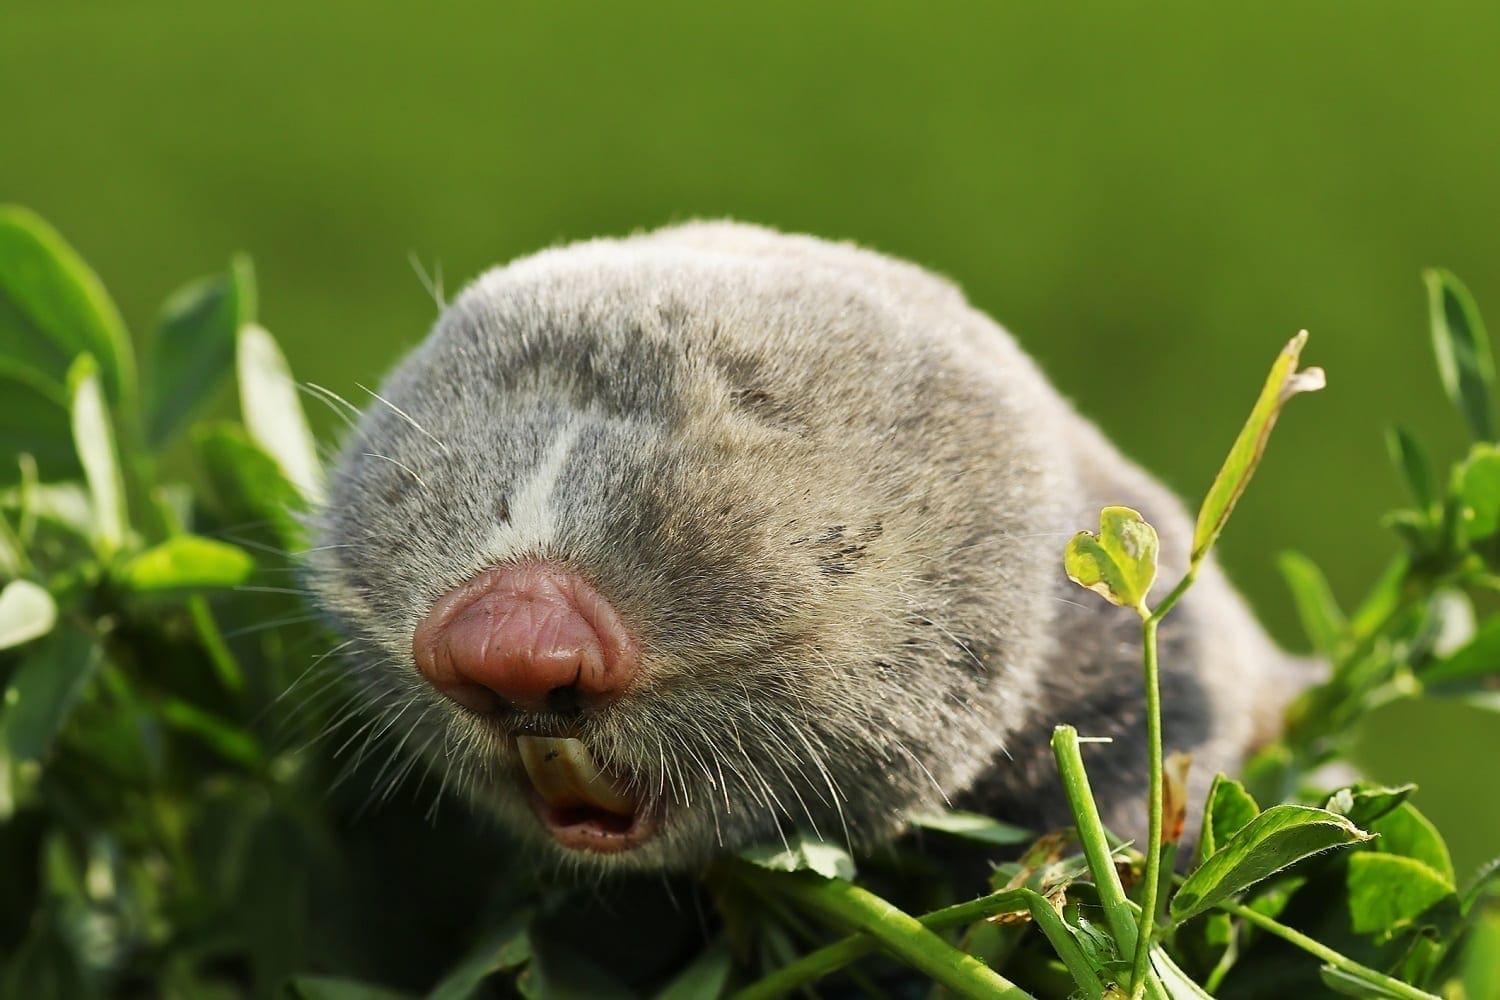 Blind Mole-Rat showing furry face with no visible eyes: ID 138105249 © Taviphoto | Dreamstime.com